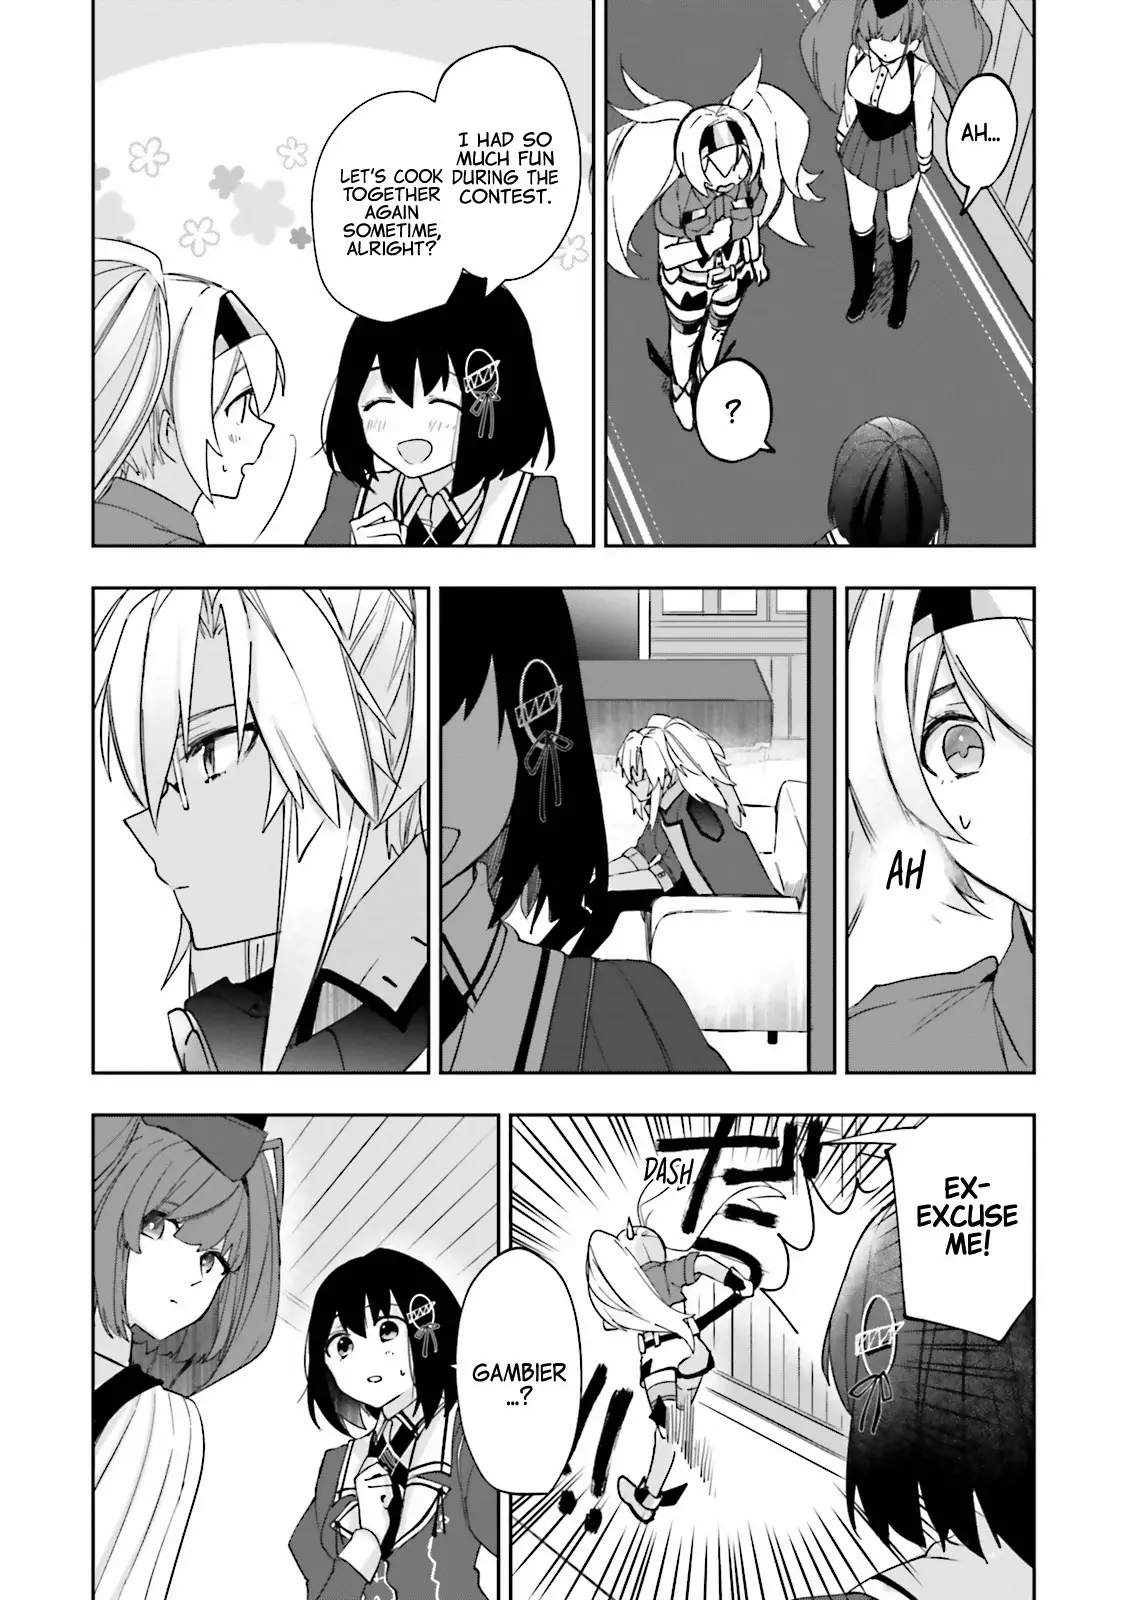 Kantai Collection -Kancolle- Tonight, Another "salute"! - 24 page 9-ccb2d9f5